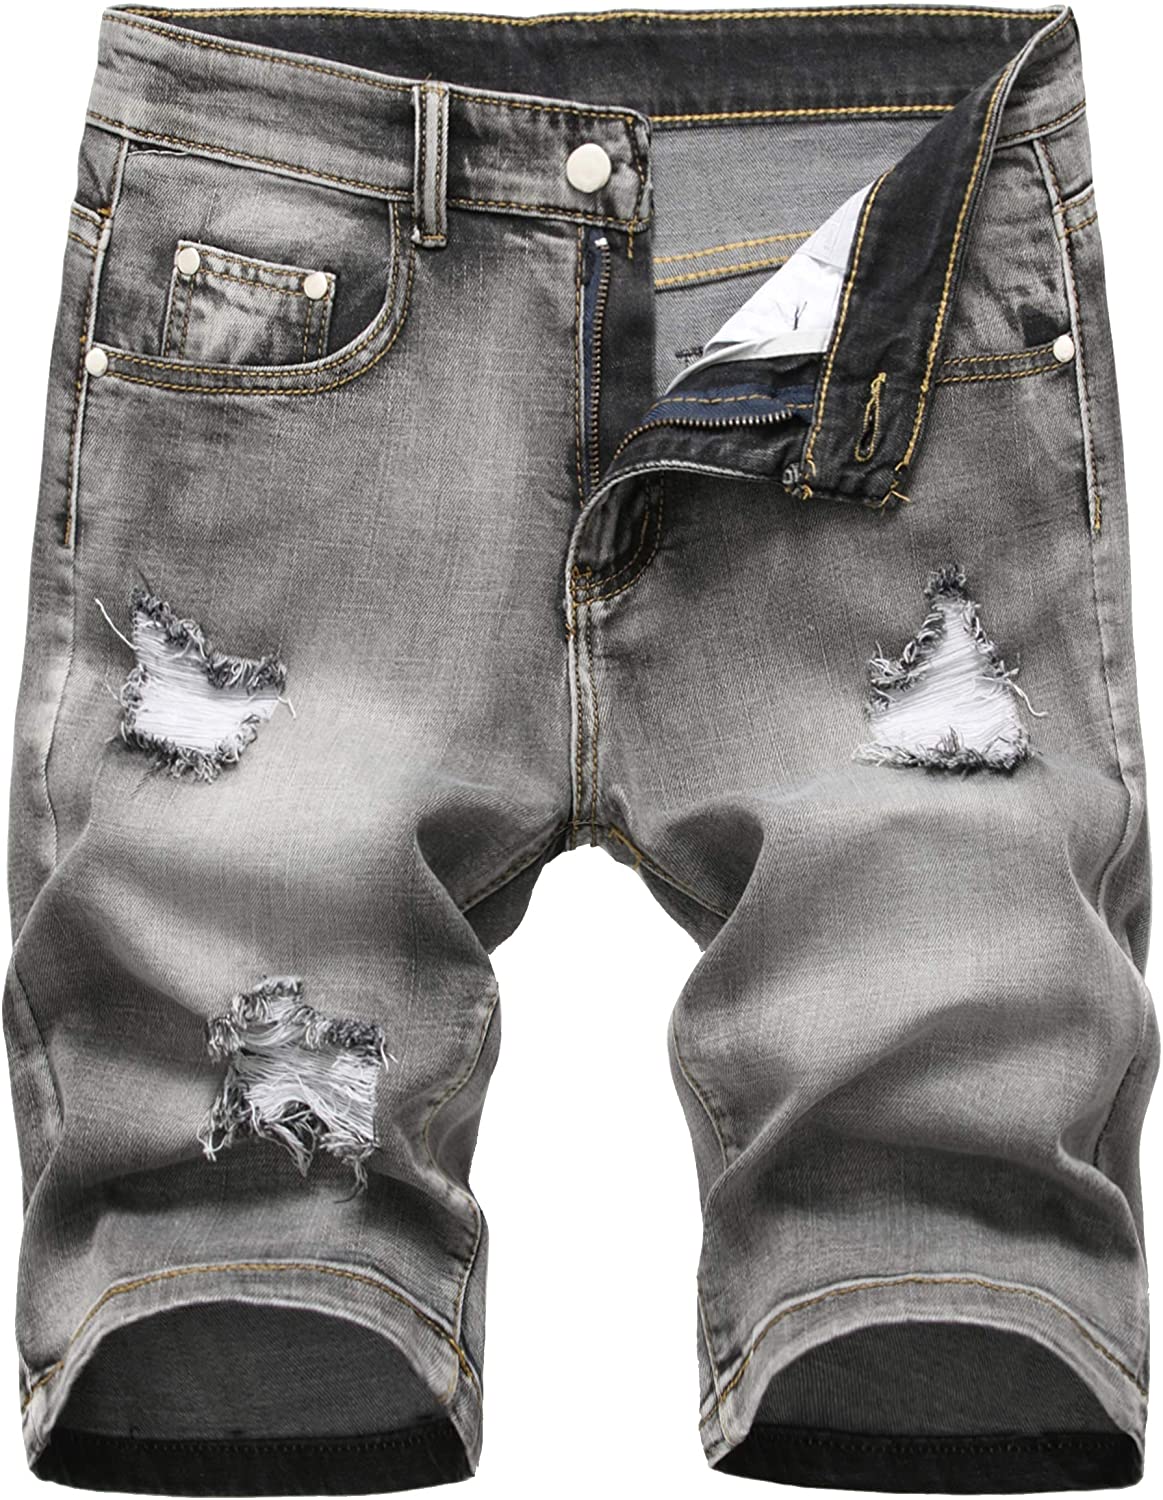 Grimgrow Men's Casual Ripped Short Jeans Mid Waist Distressed Denim Shorts 